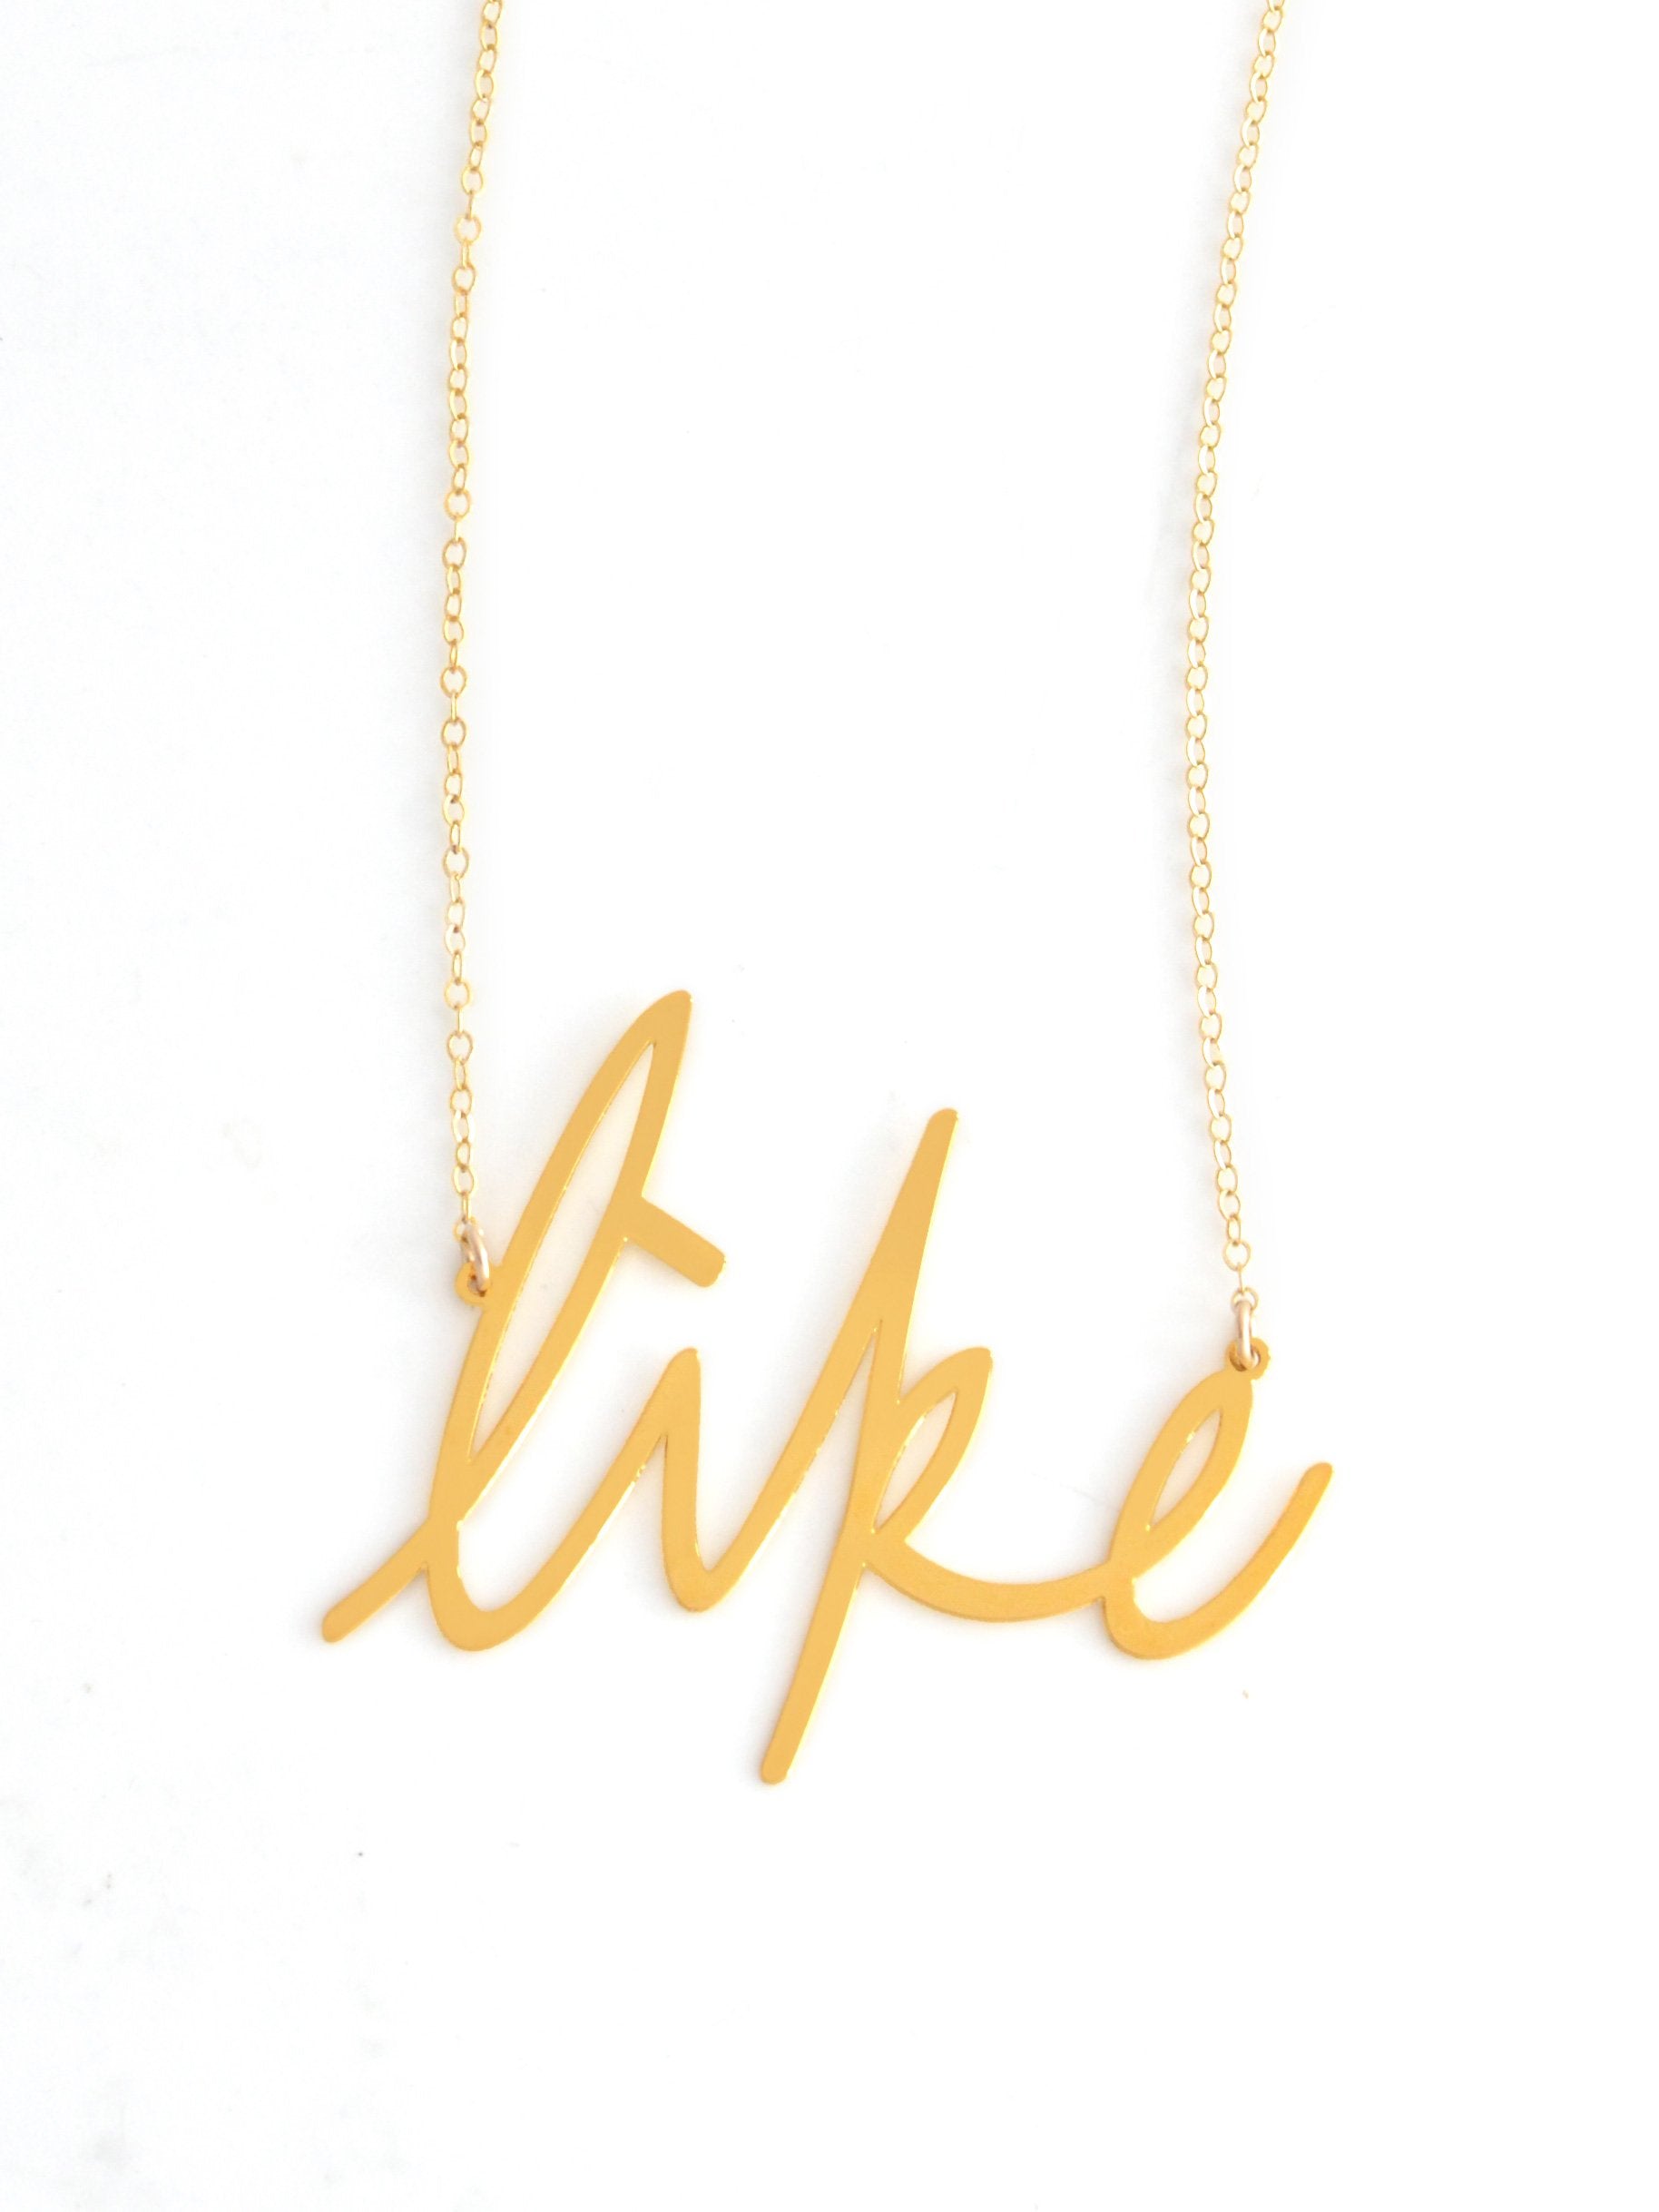 Like Necklace - High Quality, Affordable, Hand Written, Self Love, Mantra Word Necklace - Available in Gold and Silver - Small and Large Sizes - Made in USA - Brevity Jewelry